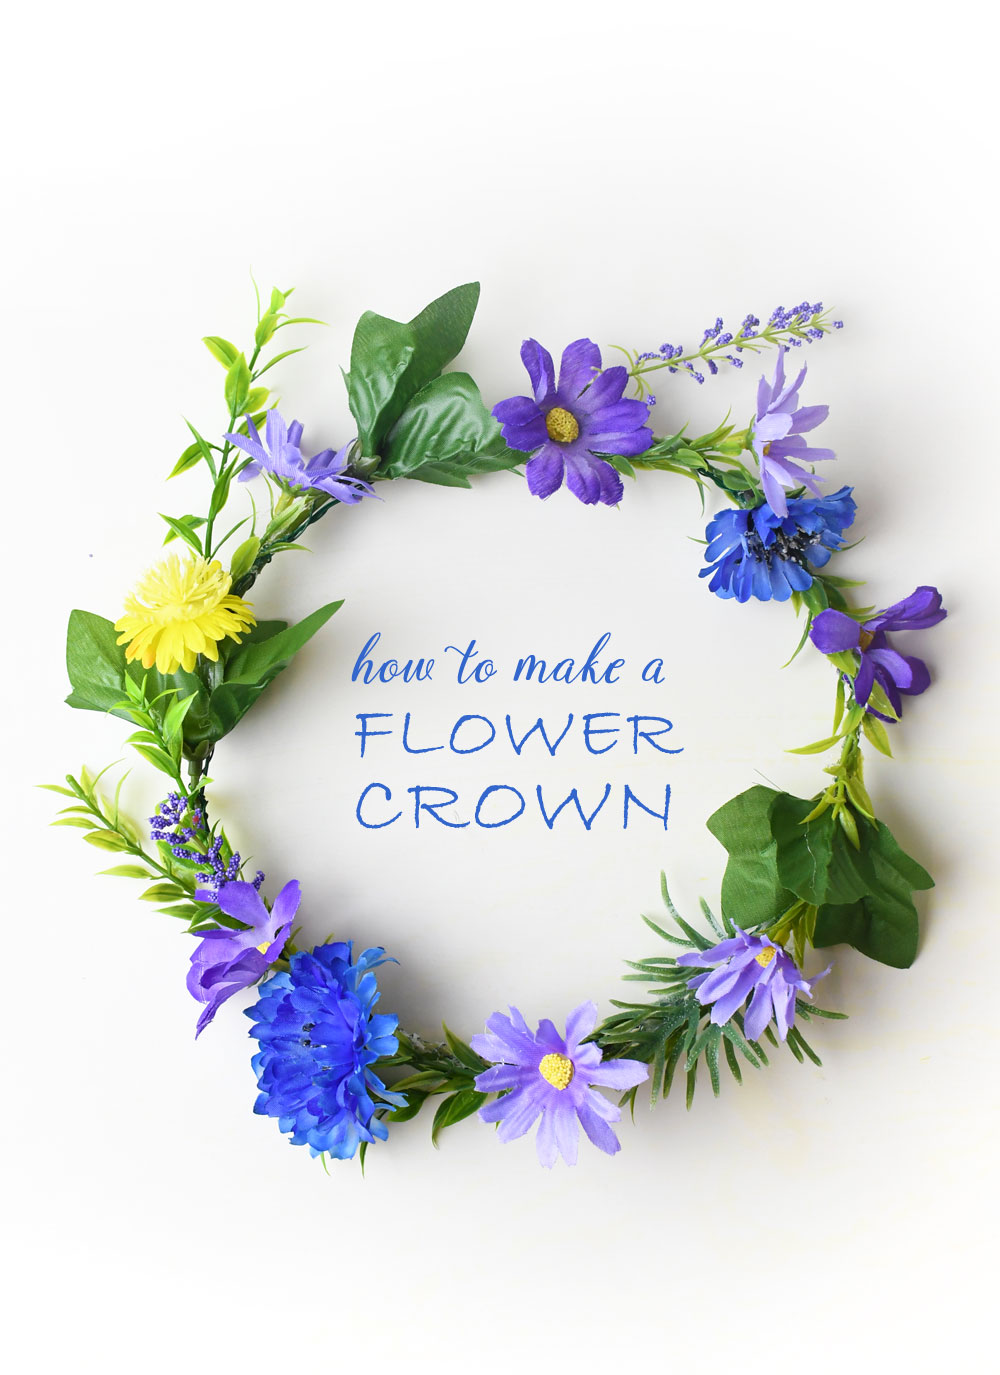 How to make a flower crown for a photoshoot